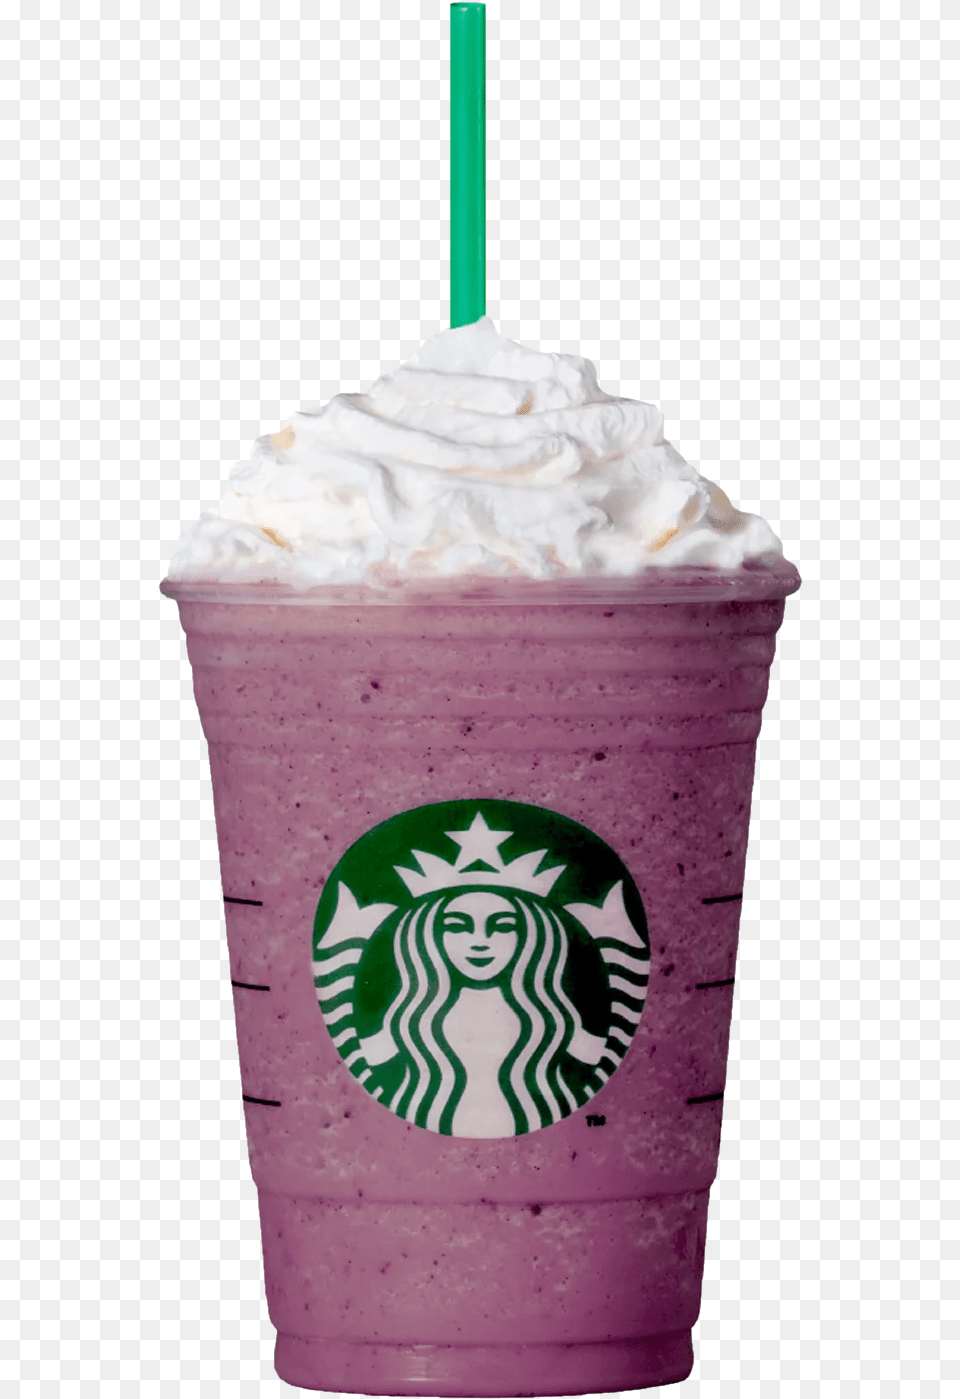 Frappuccino 3 Pokemon Go Drink Starbucks, Beverage, Juice, Whipped Cream, Food Png Image